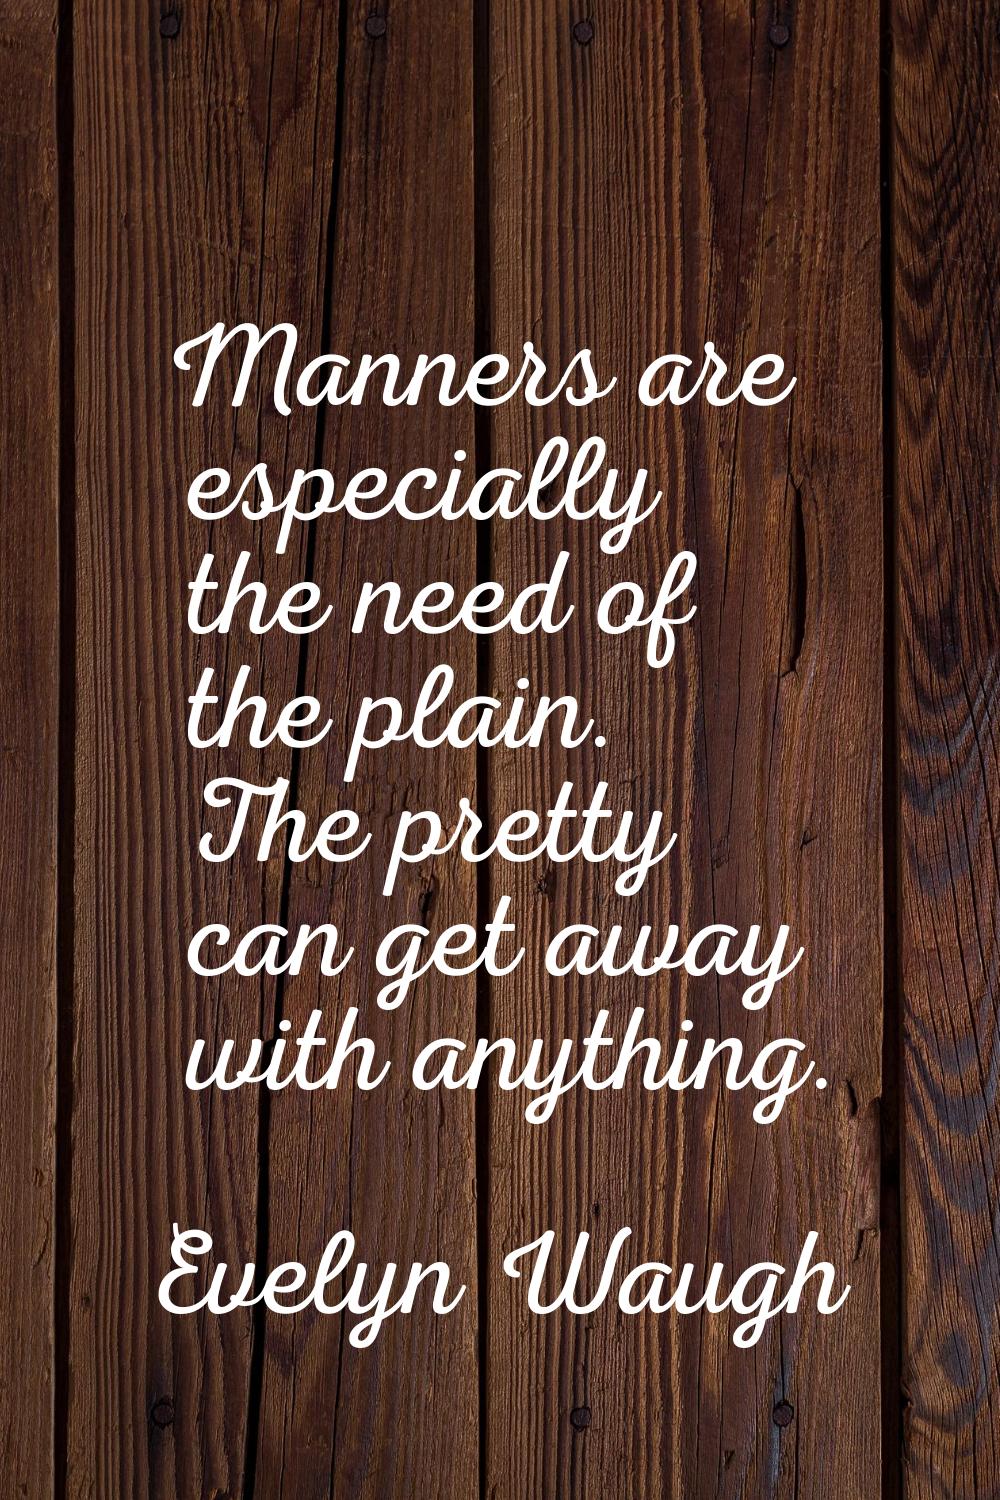 Manners are especially the need of the plain. The pretty can get away with anything.